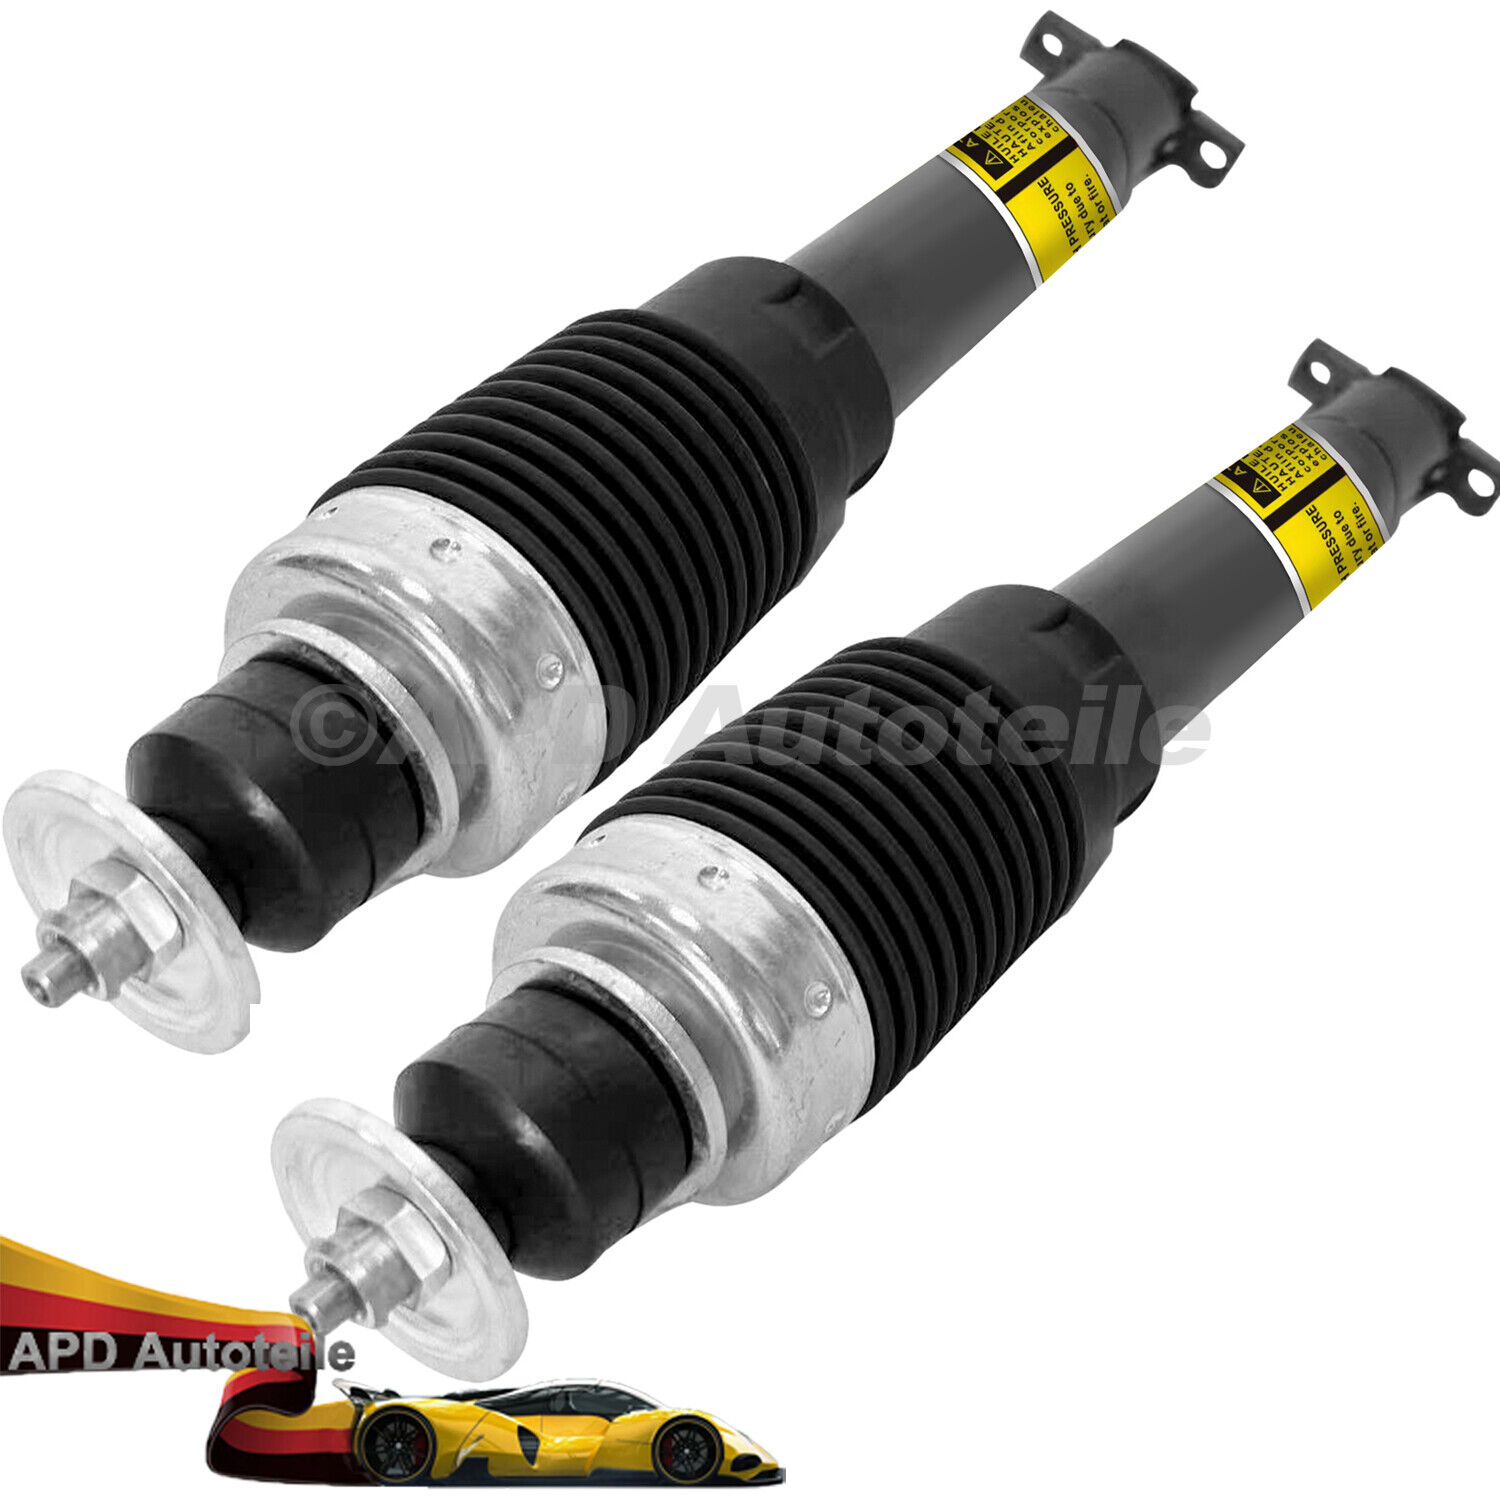 2X Front Shock Struts Absorbers w/Magnetic For Corvette C5 C6 03-13 Cadillac XLR